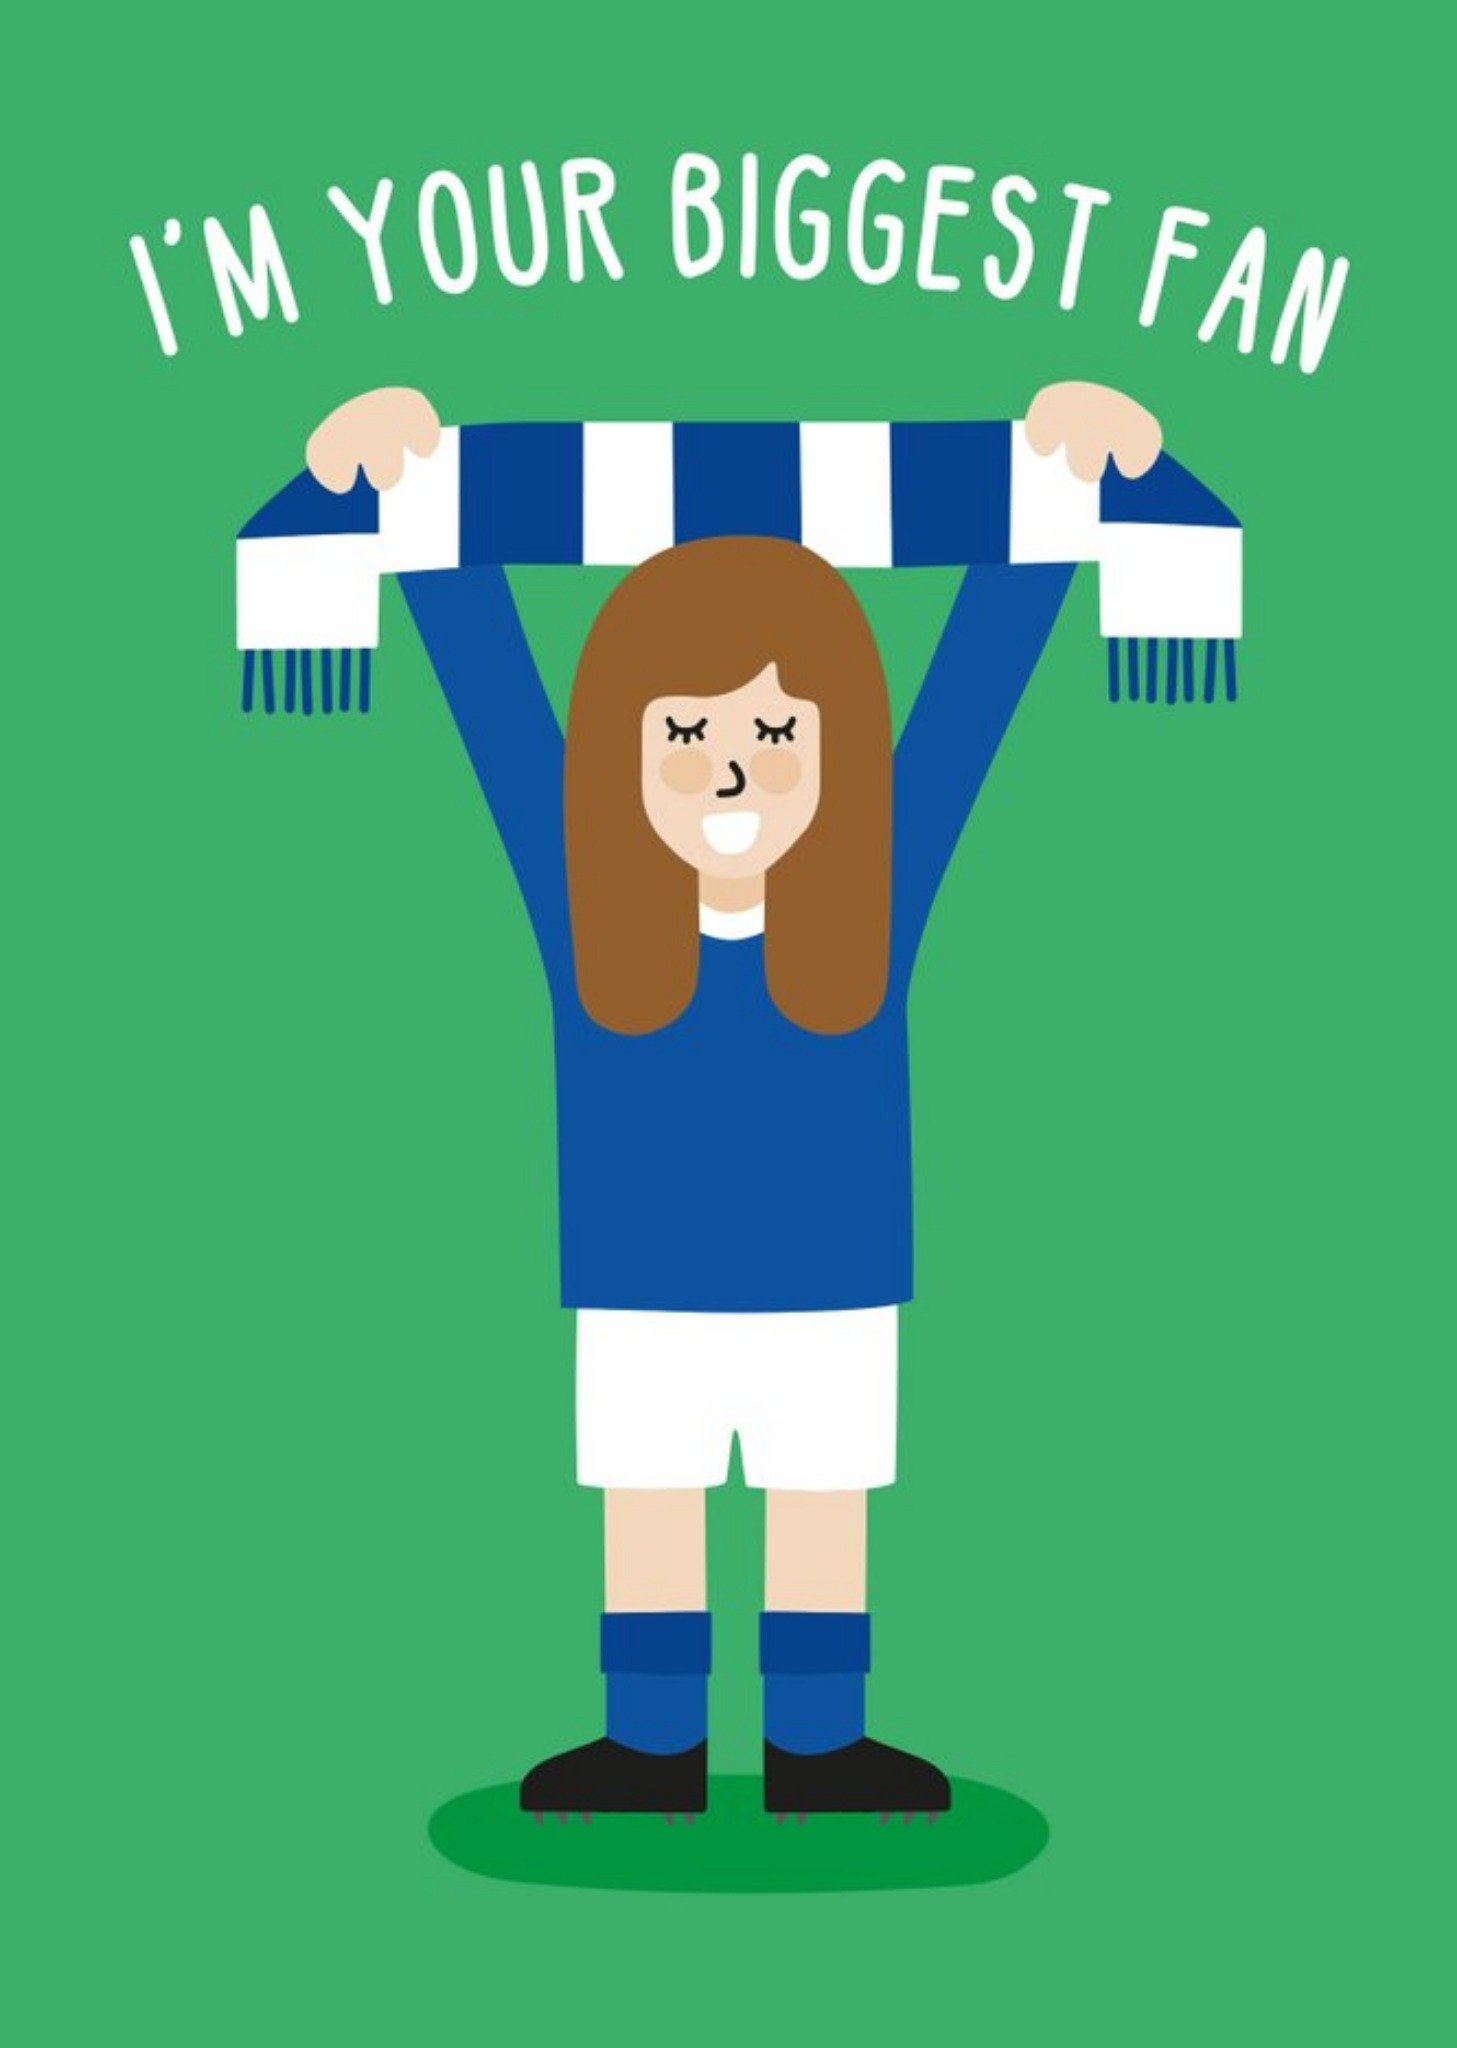 Fifa Illustration Of A Woman Wearing A Blue Football Kit I'm Your Biggest Fan Card Ecard